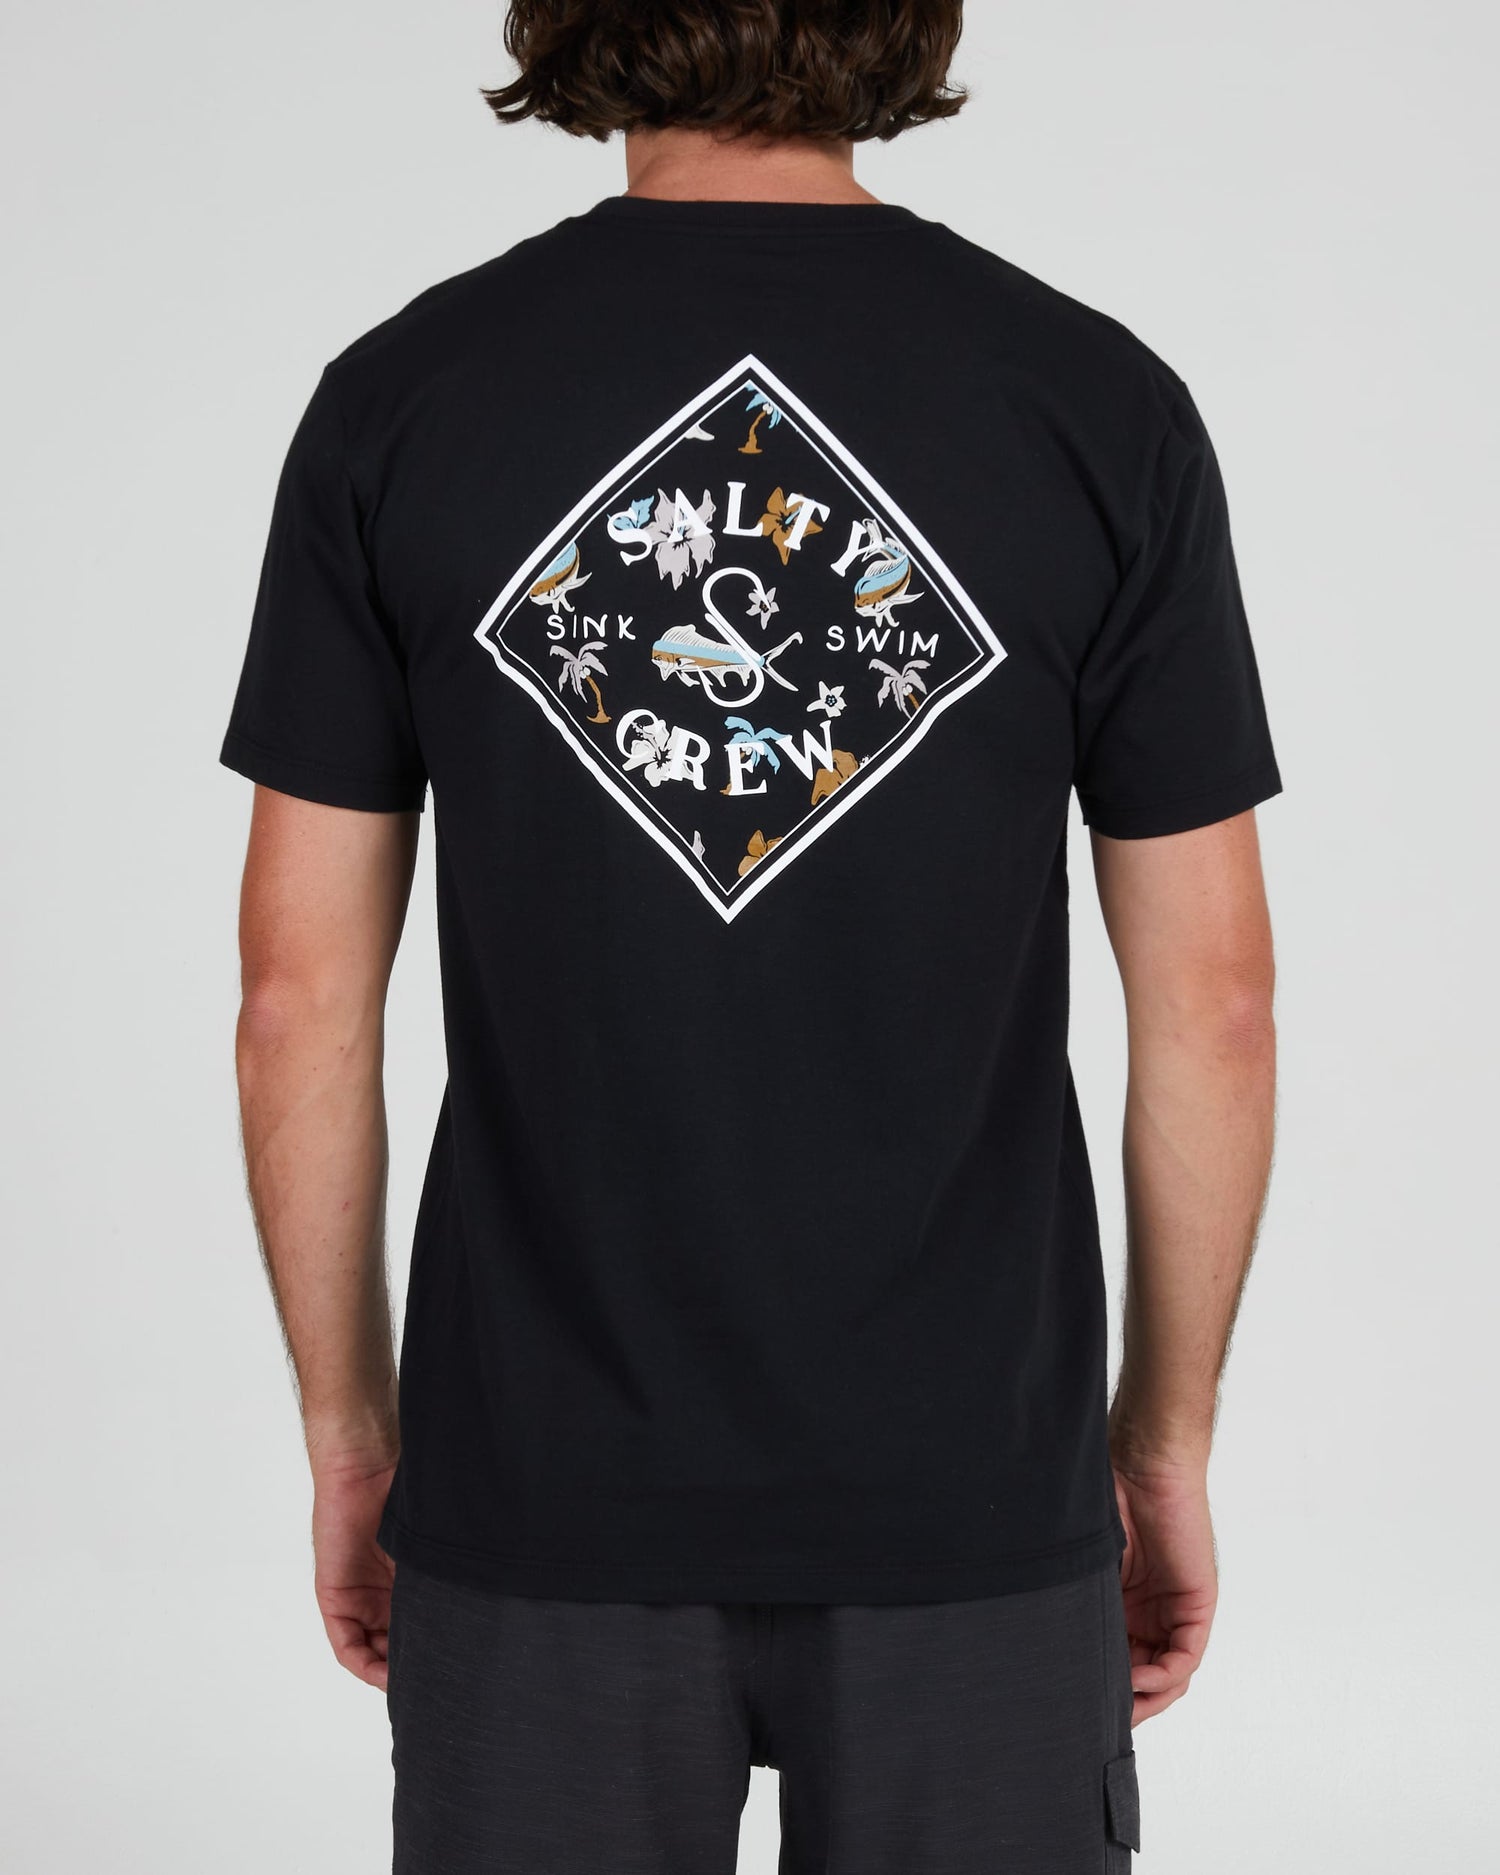 Salty crew T-SHIRTS S/S TIPPET SHORES PREMIUM S/S TEE - Black in Black